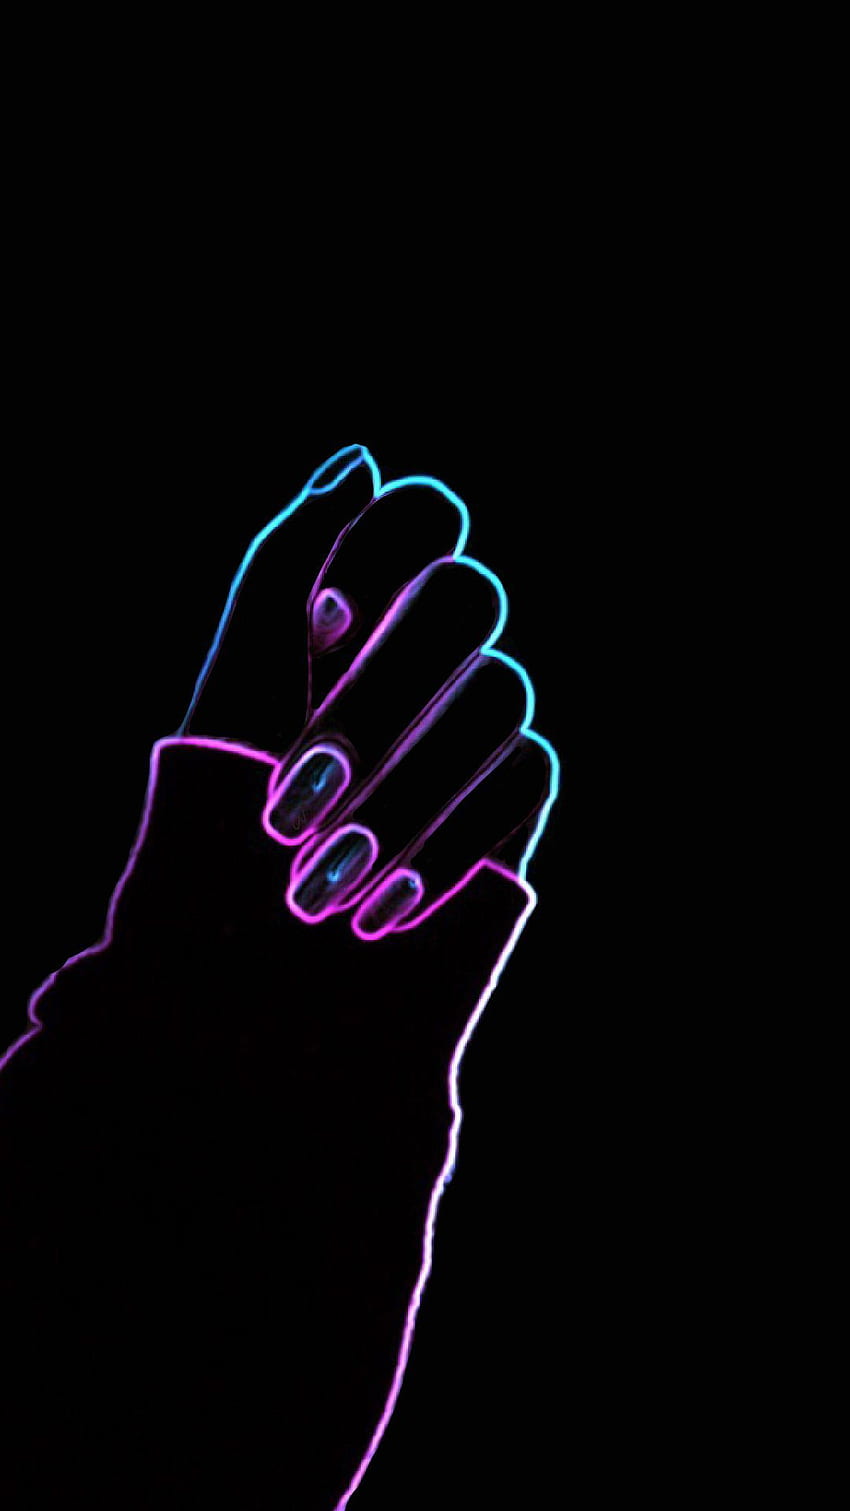 A person's hand is holding something in the dark - Neon pink